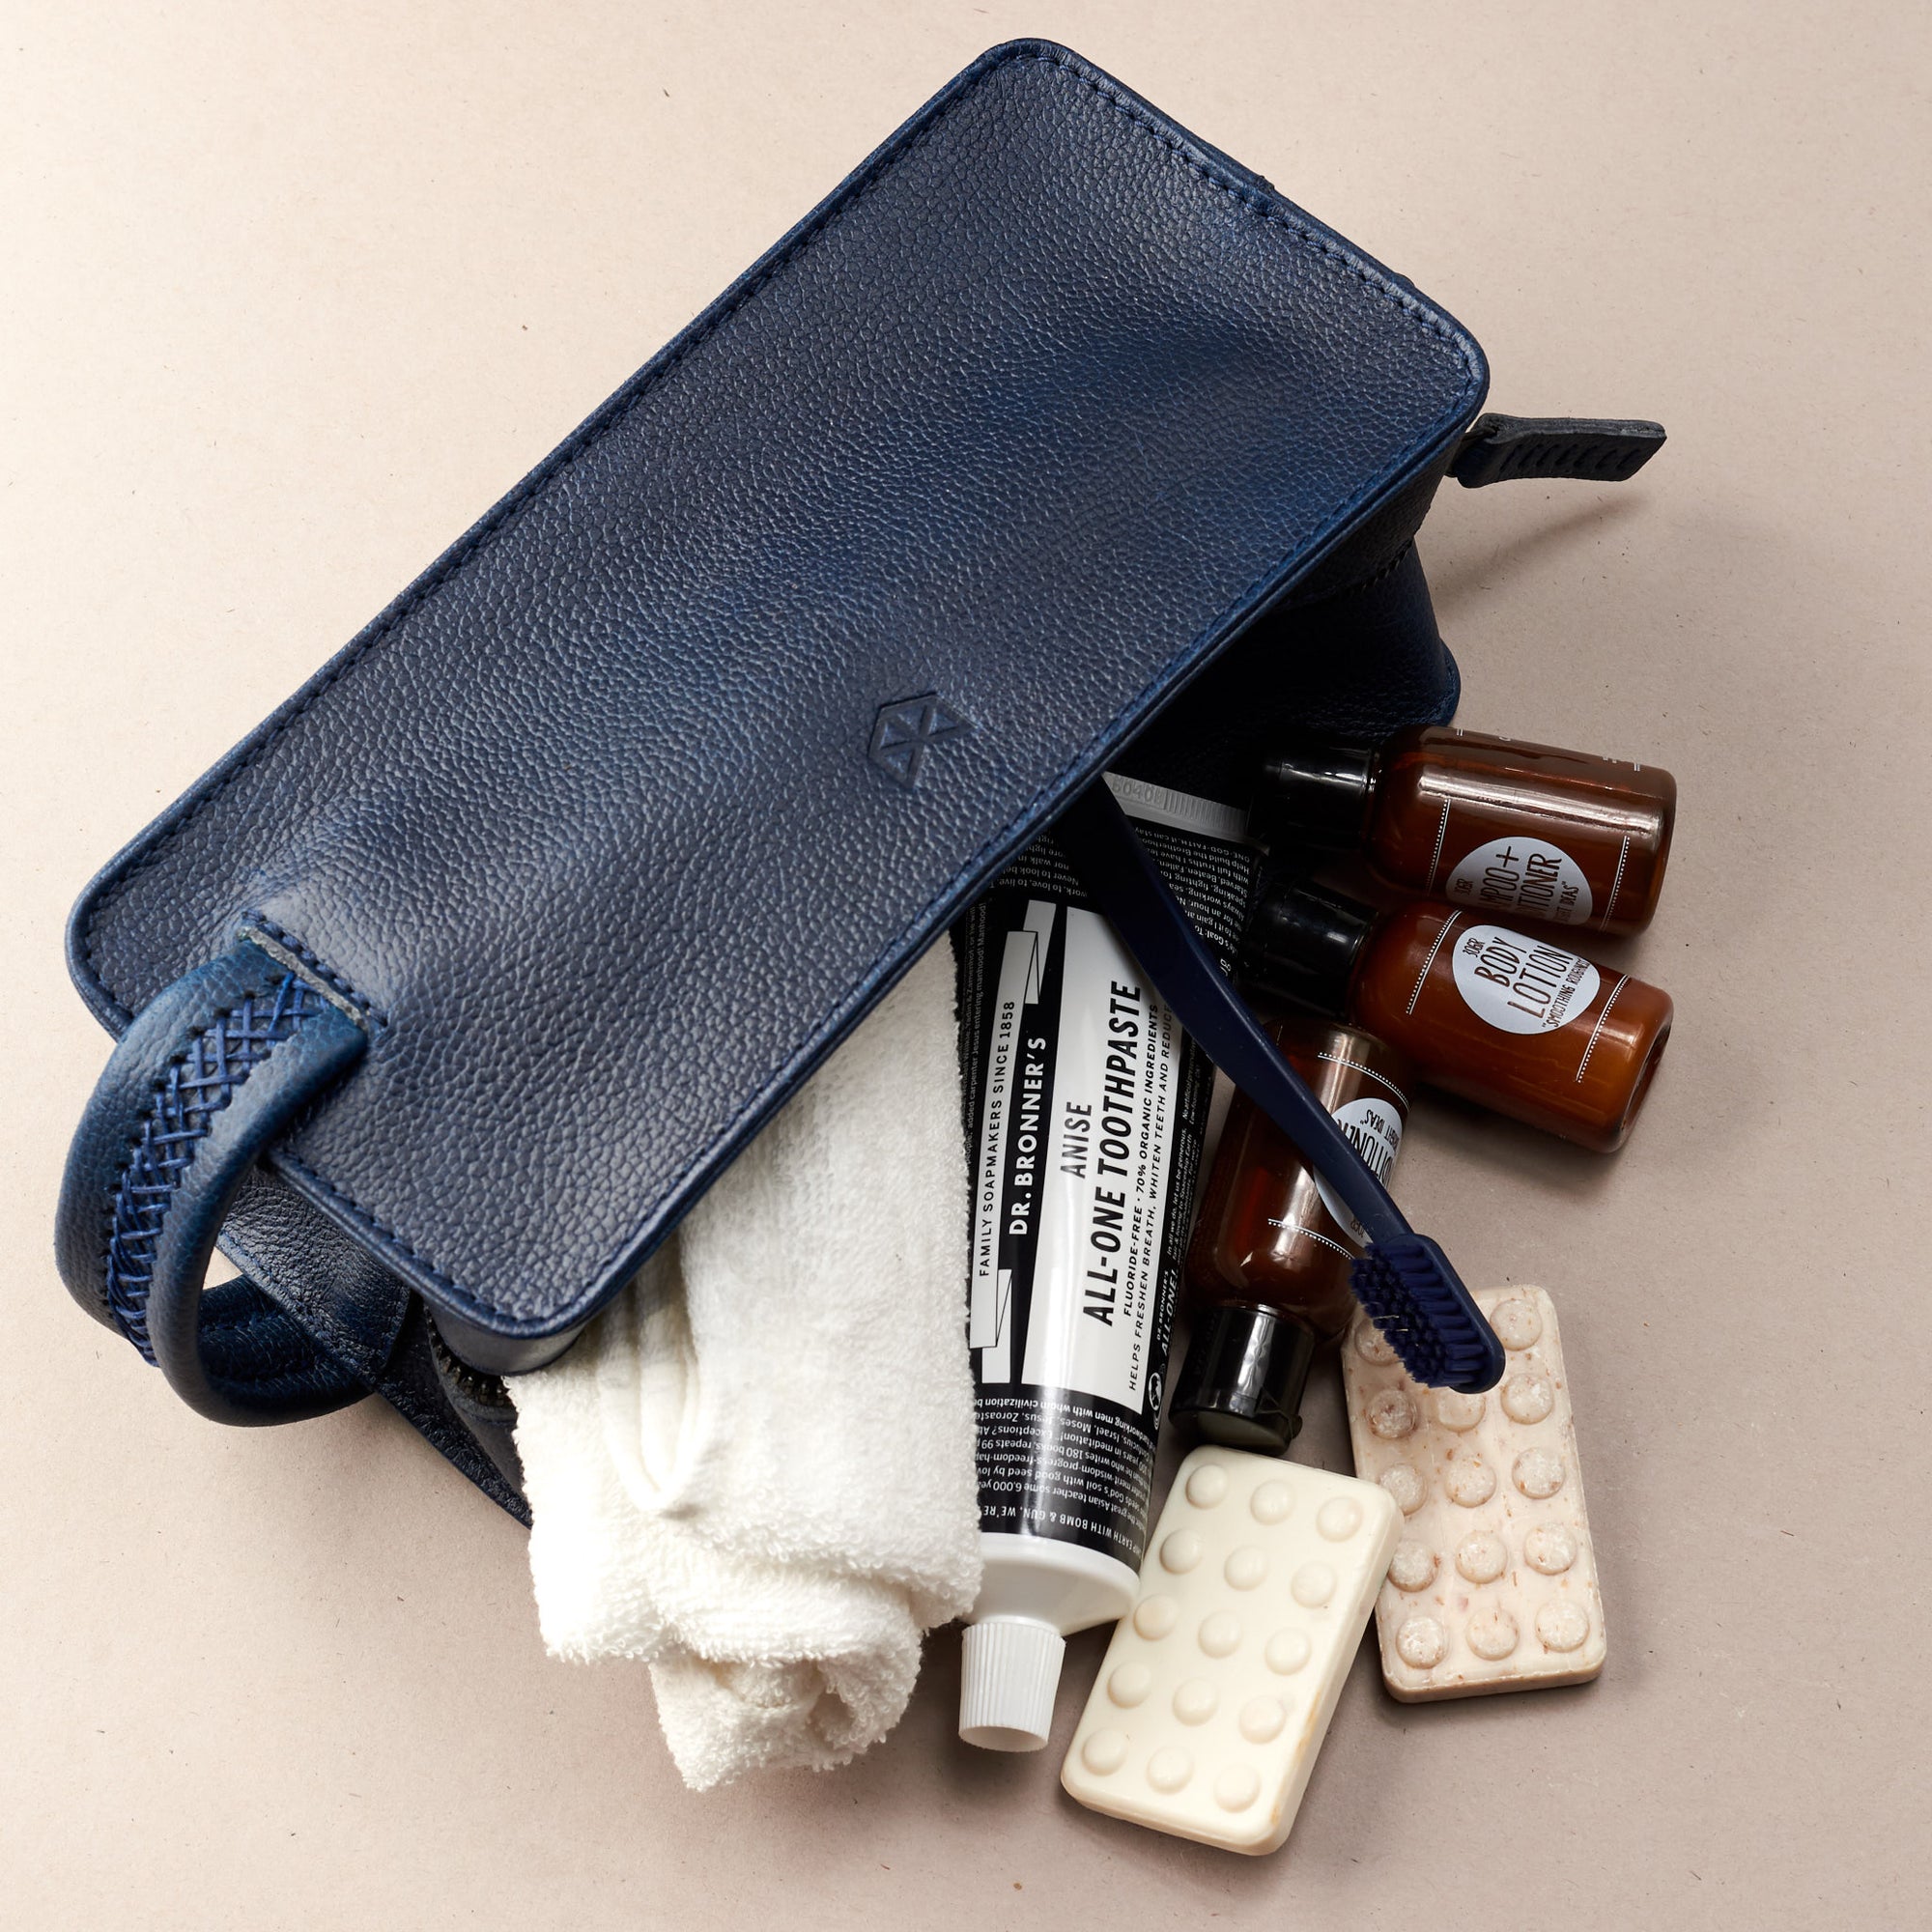 Styling 2. Ocean blue leather toiletry, shaving bag with hand stitched handle. Groomsmen gifts. Leather good crafted by Capra Leather 